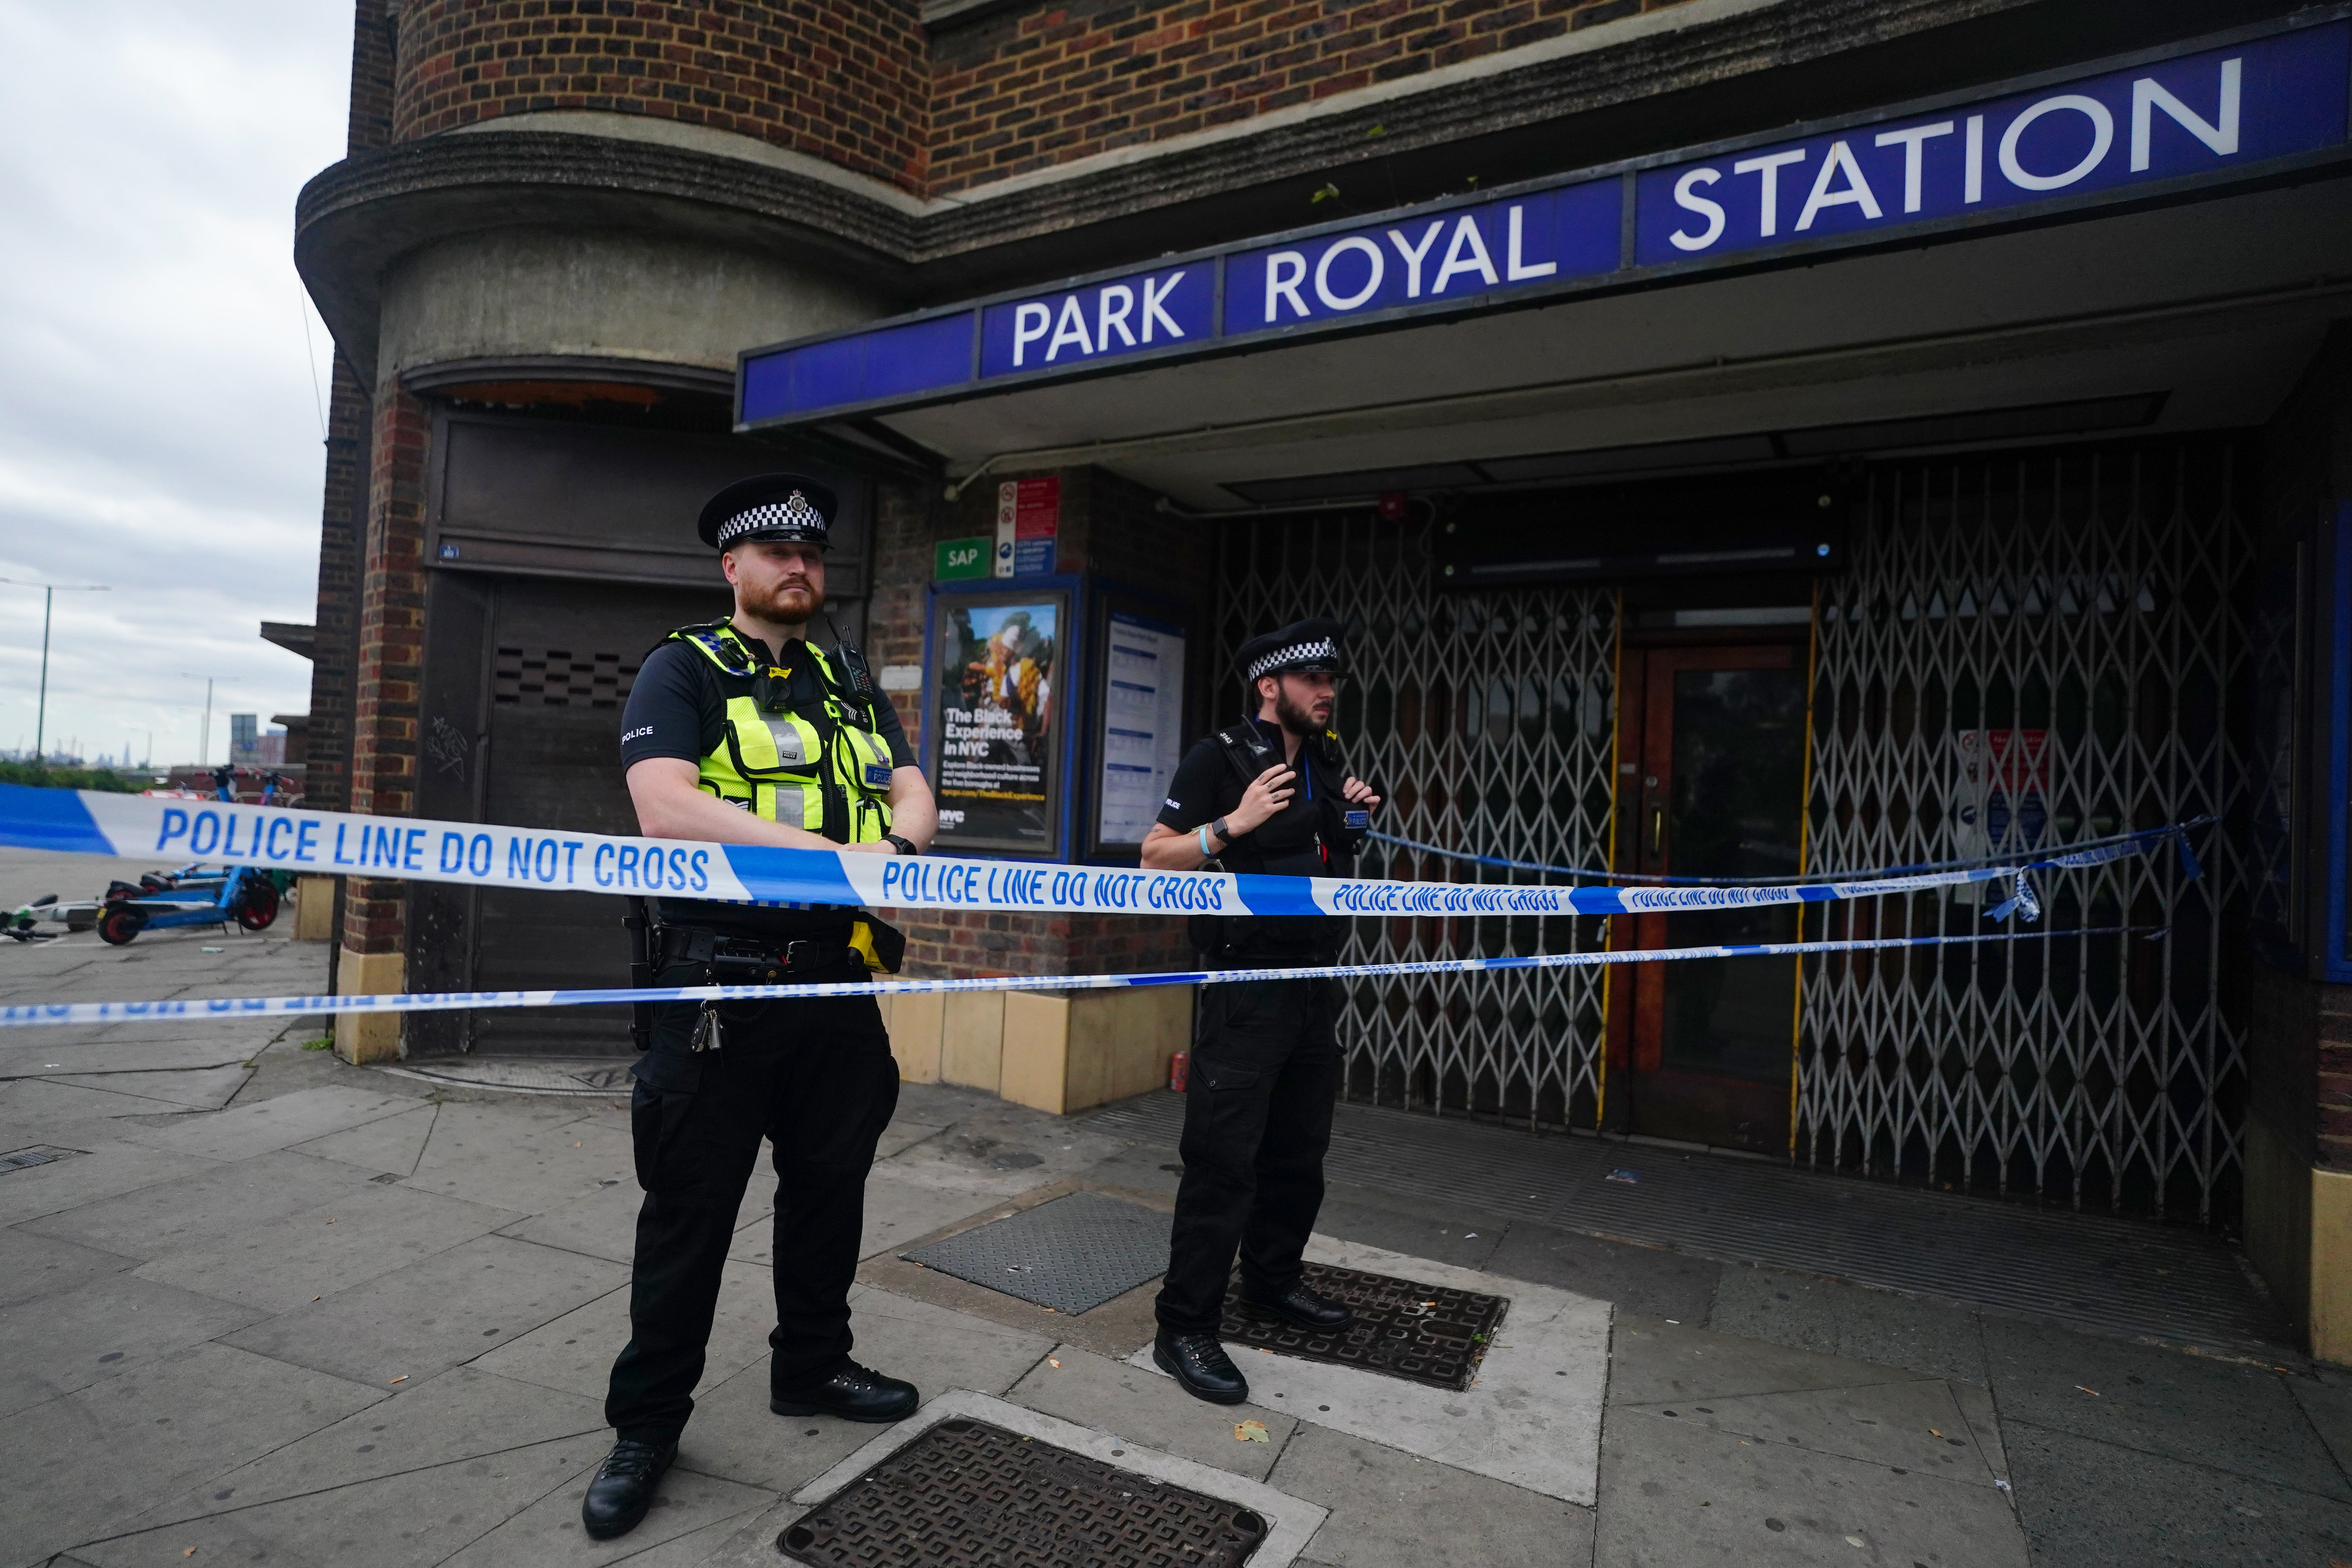 Underground trains are currently not stopping at Park Royal Station as it remains closed